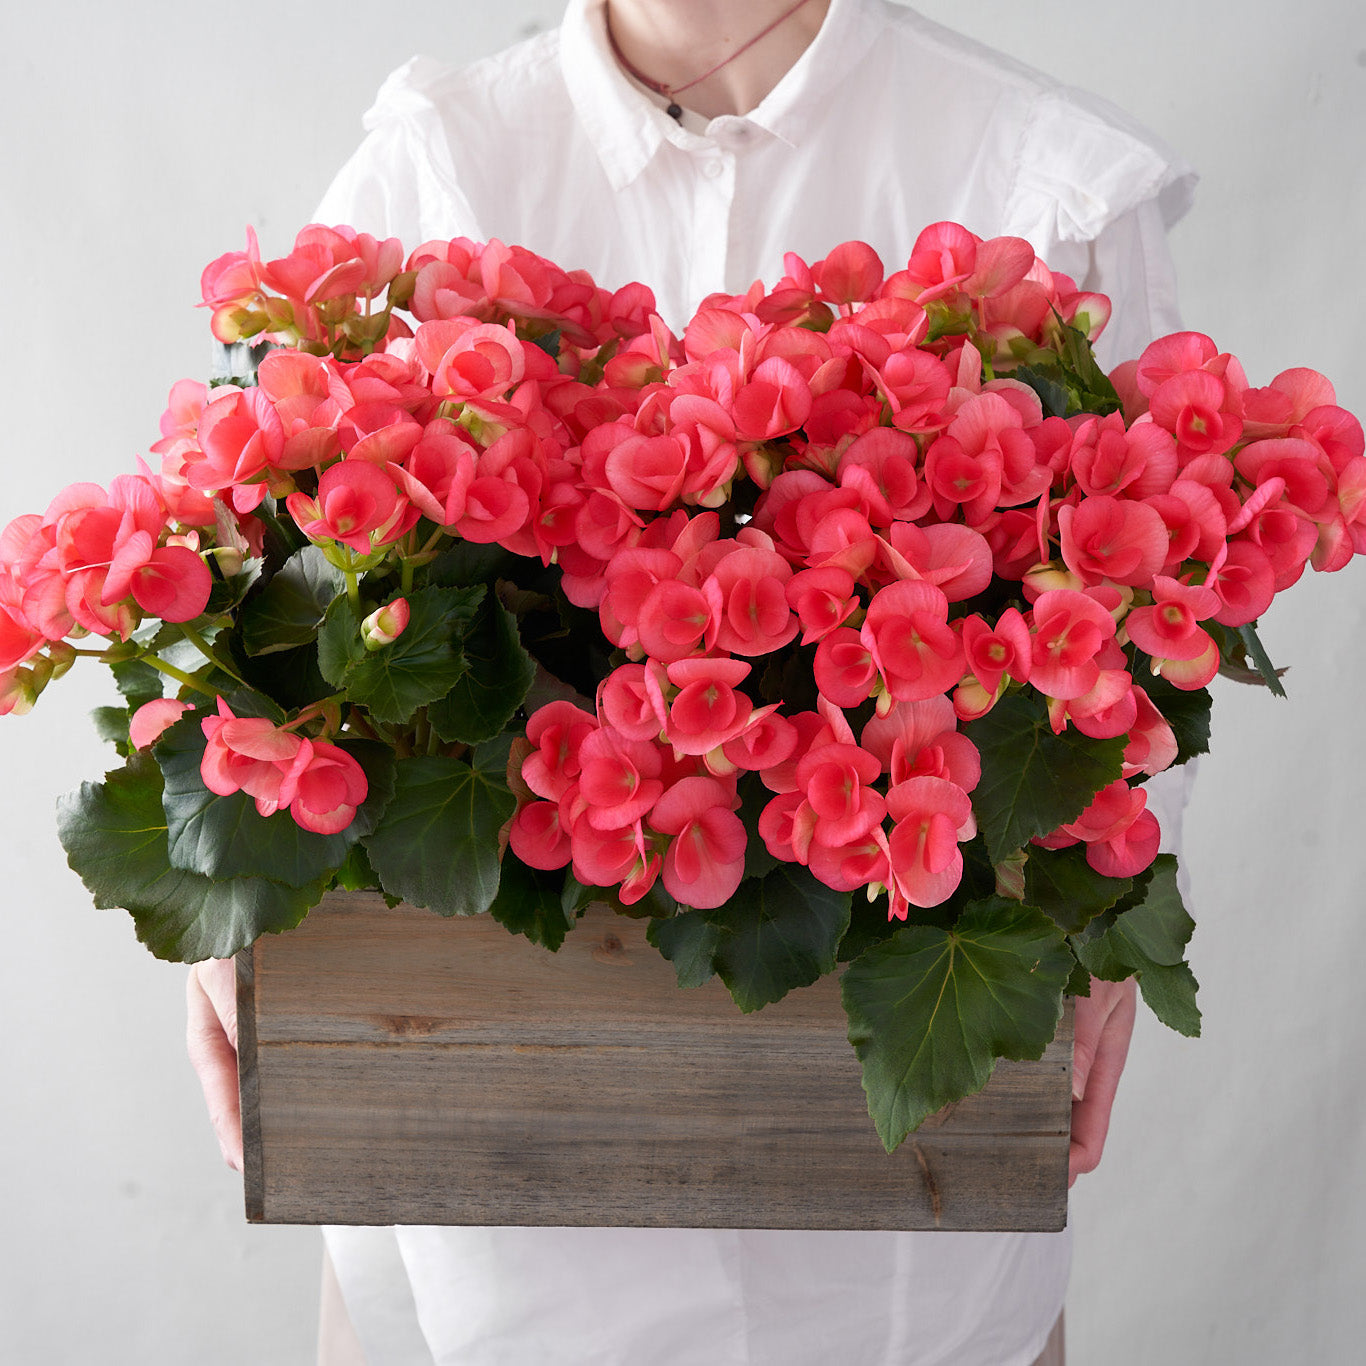 Pink Begonia in Wooden Box